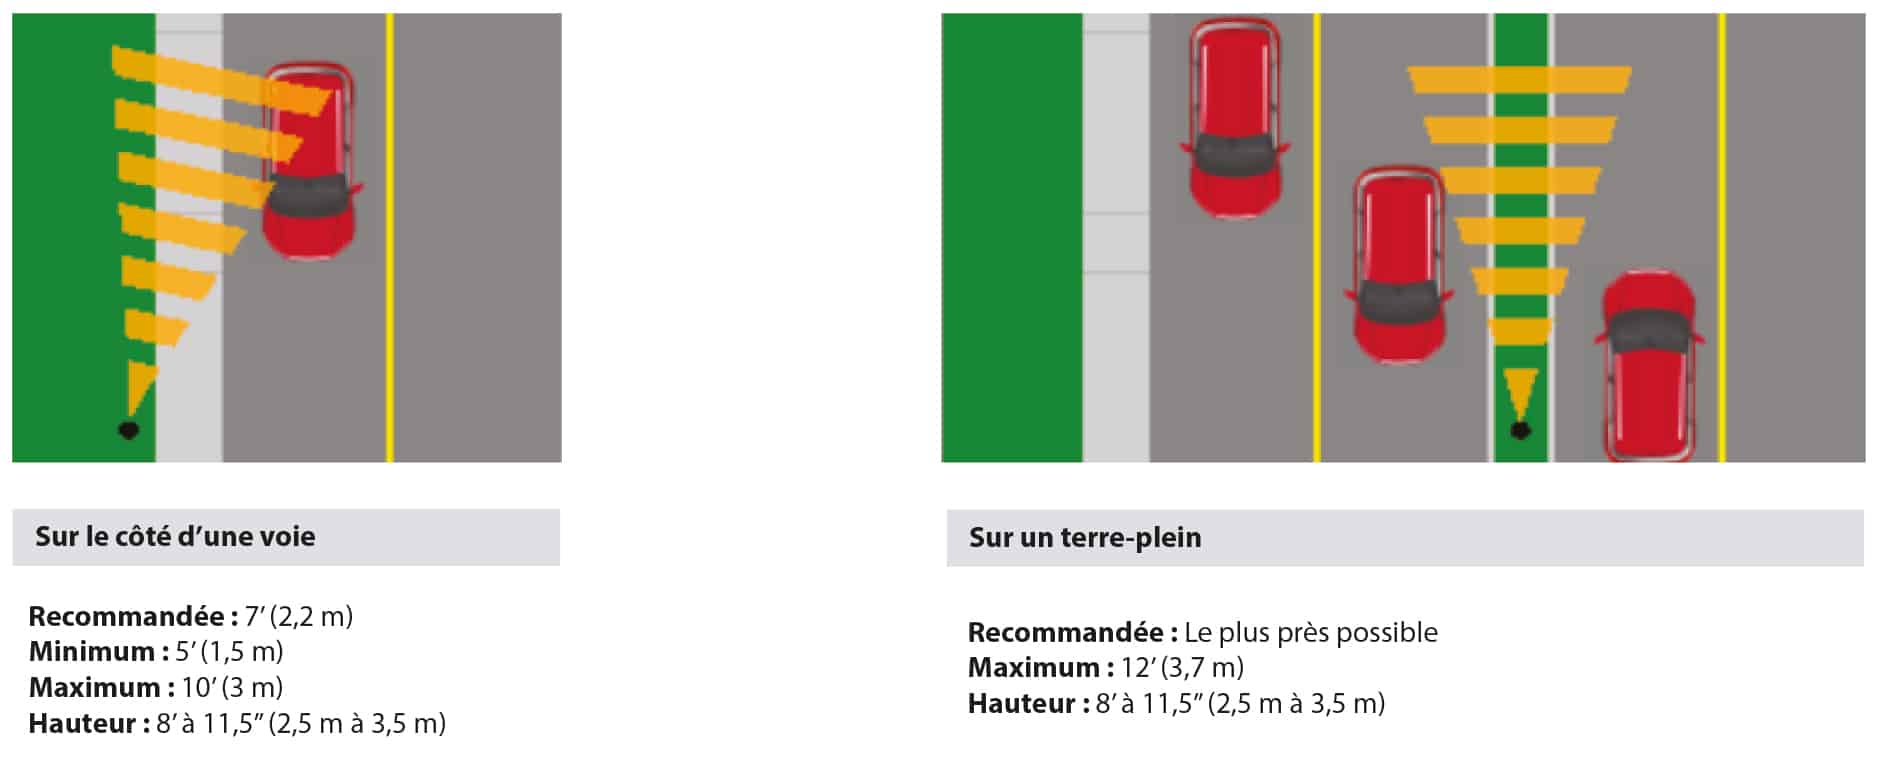 Analyseur de trafic routier TNS-SV - Signalisation routière zone scolaire  - Trafic Innovation